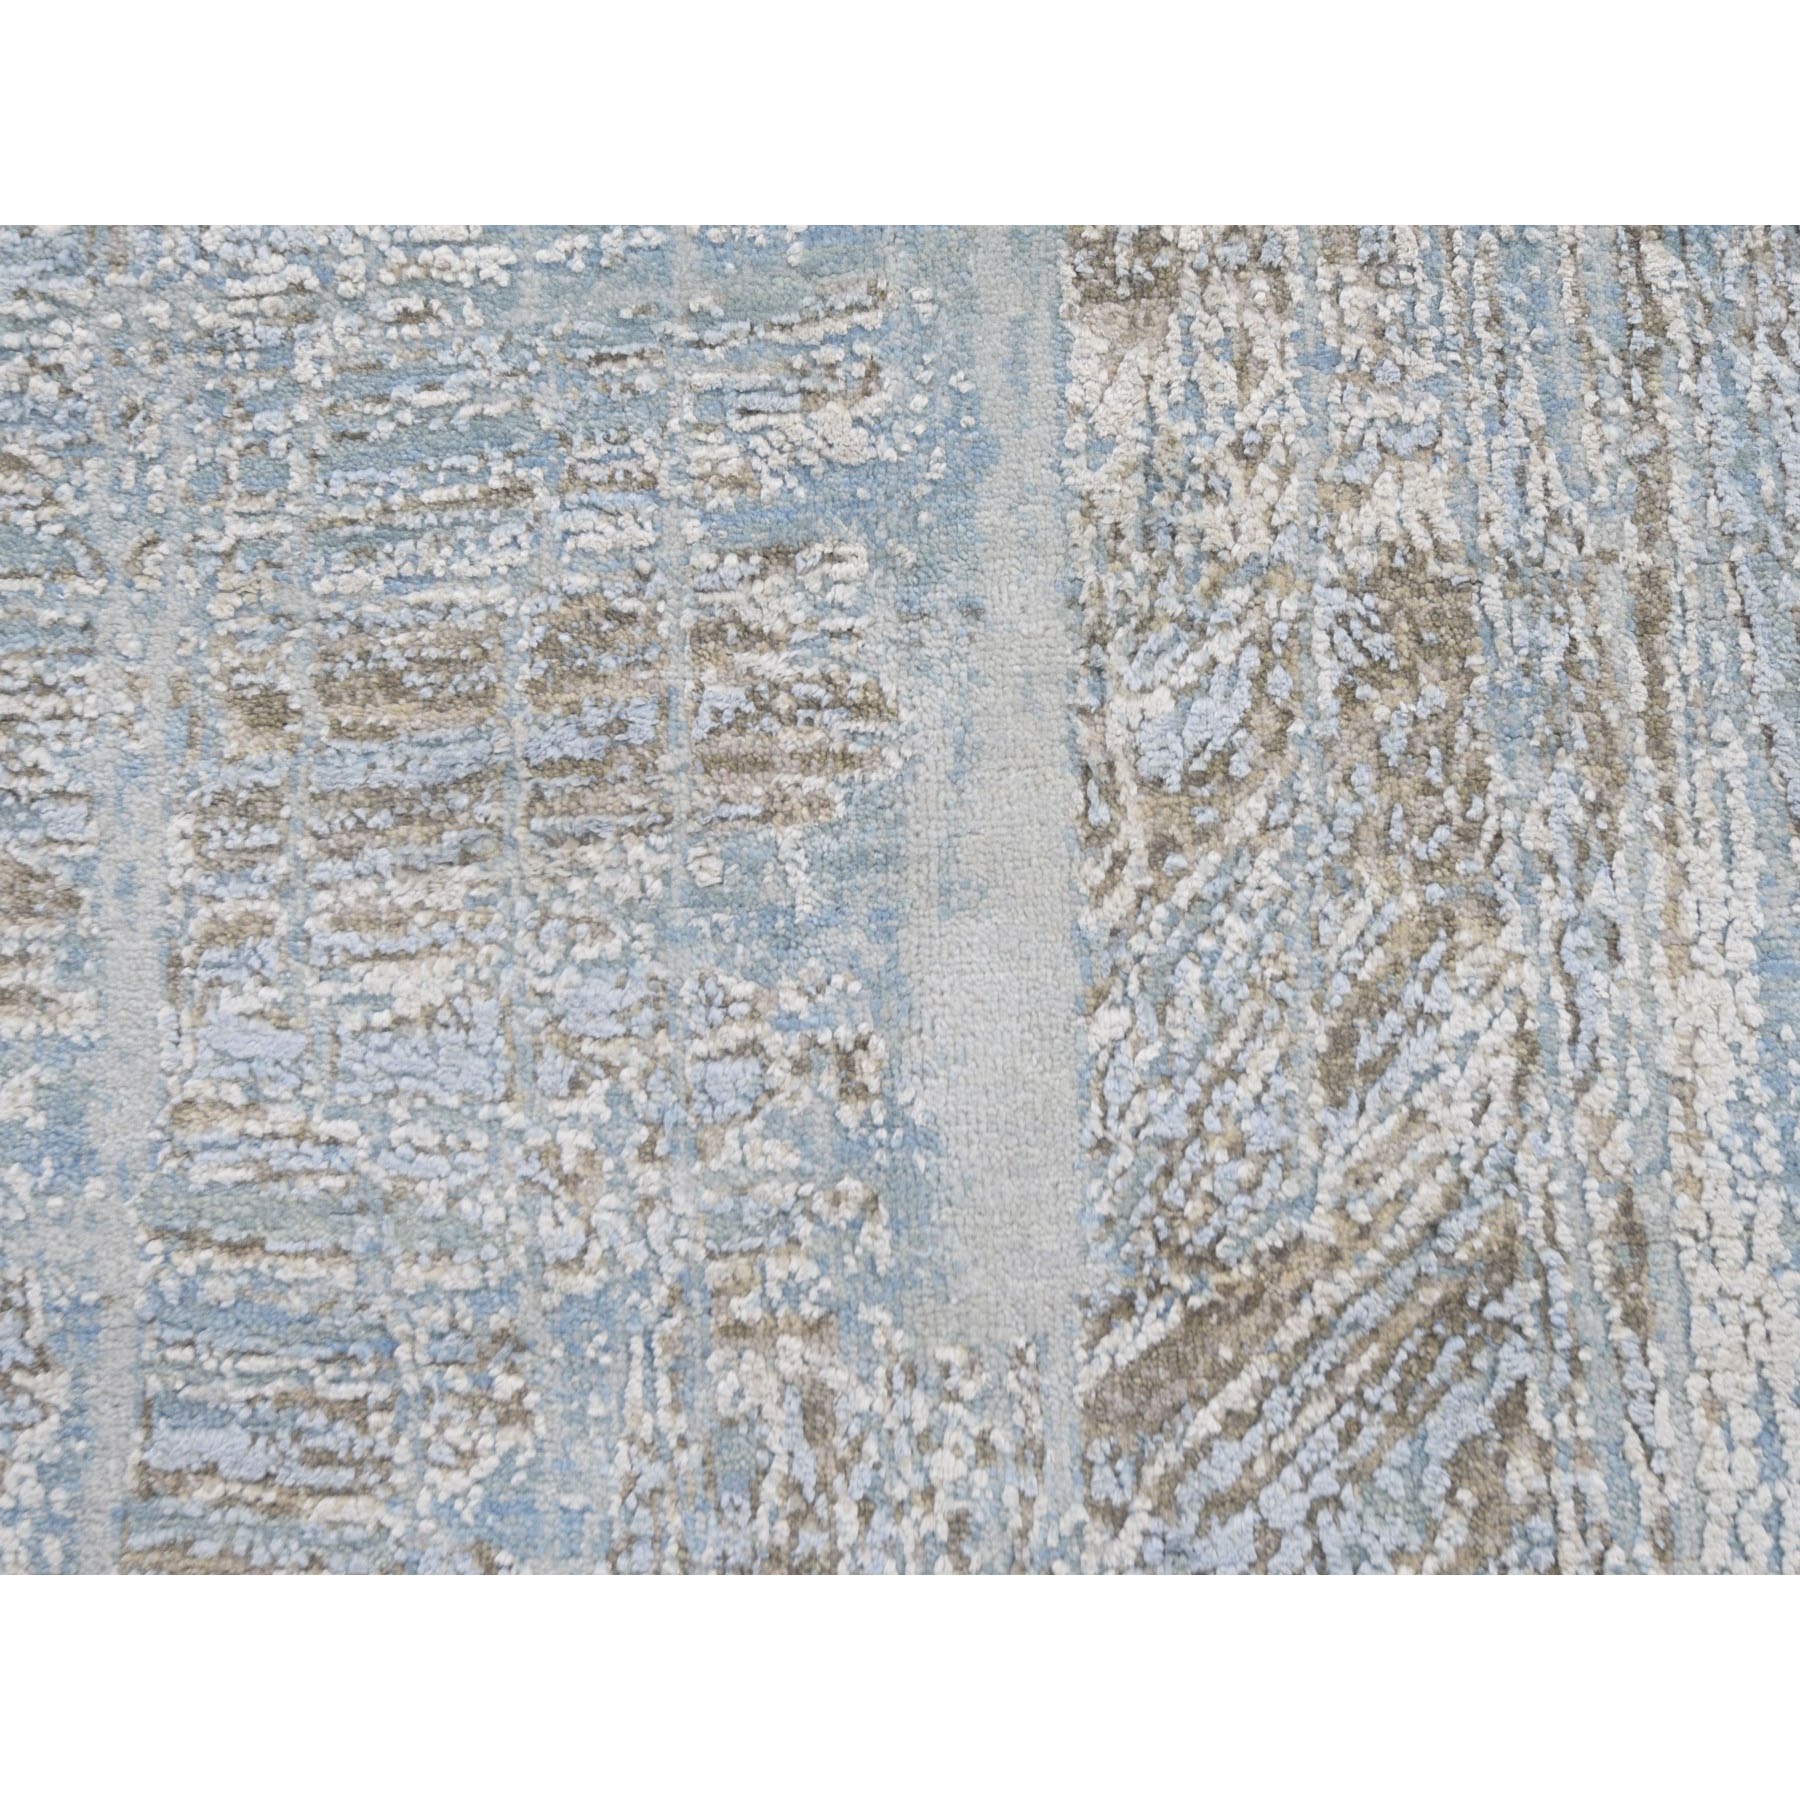 8-9 x12- THE DRIPPING PAINT BRUSH, Silk With Textured Wool Hand Knotted Oriental Rug 